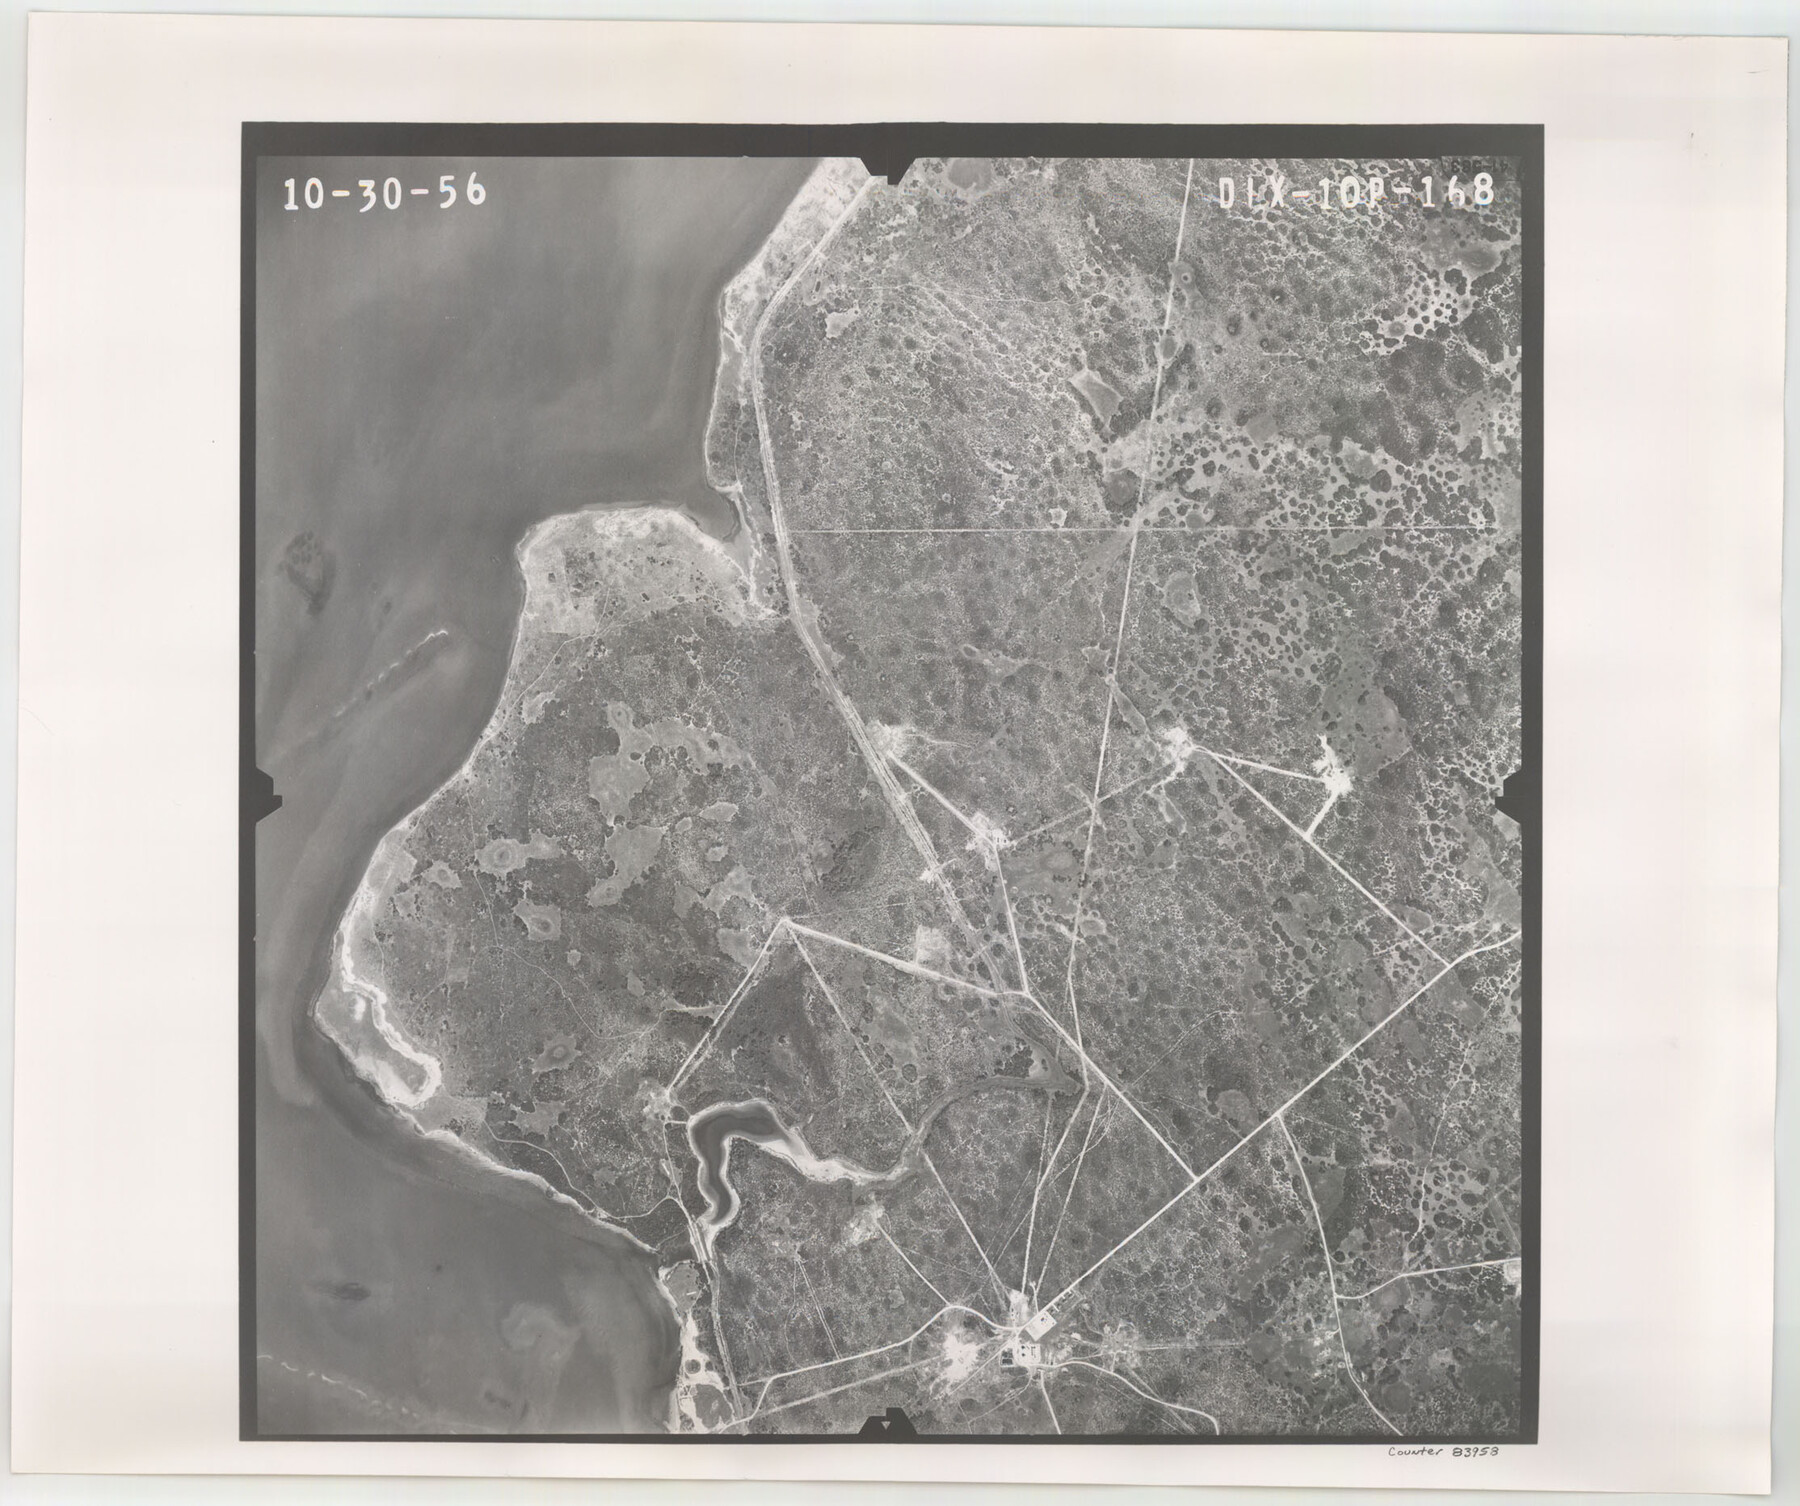 83958, Flight Mission No. DIX-10P, Frame 168, Aransas County, General Map Collection